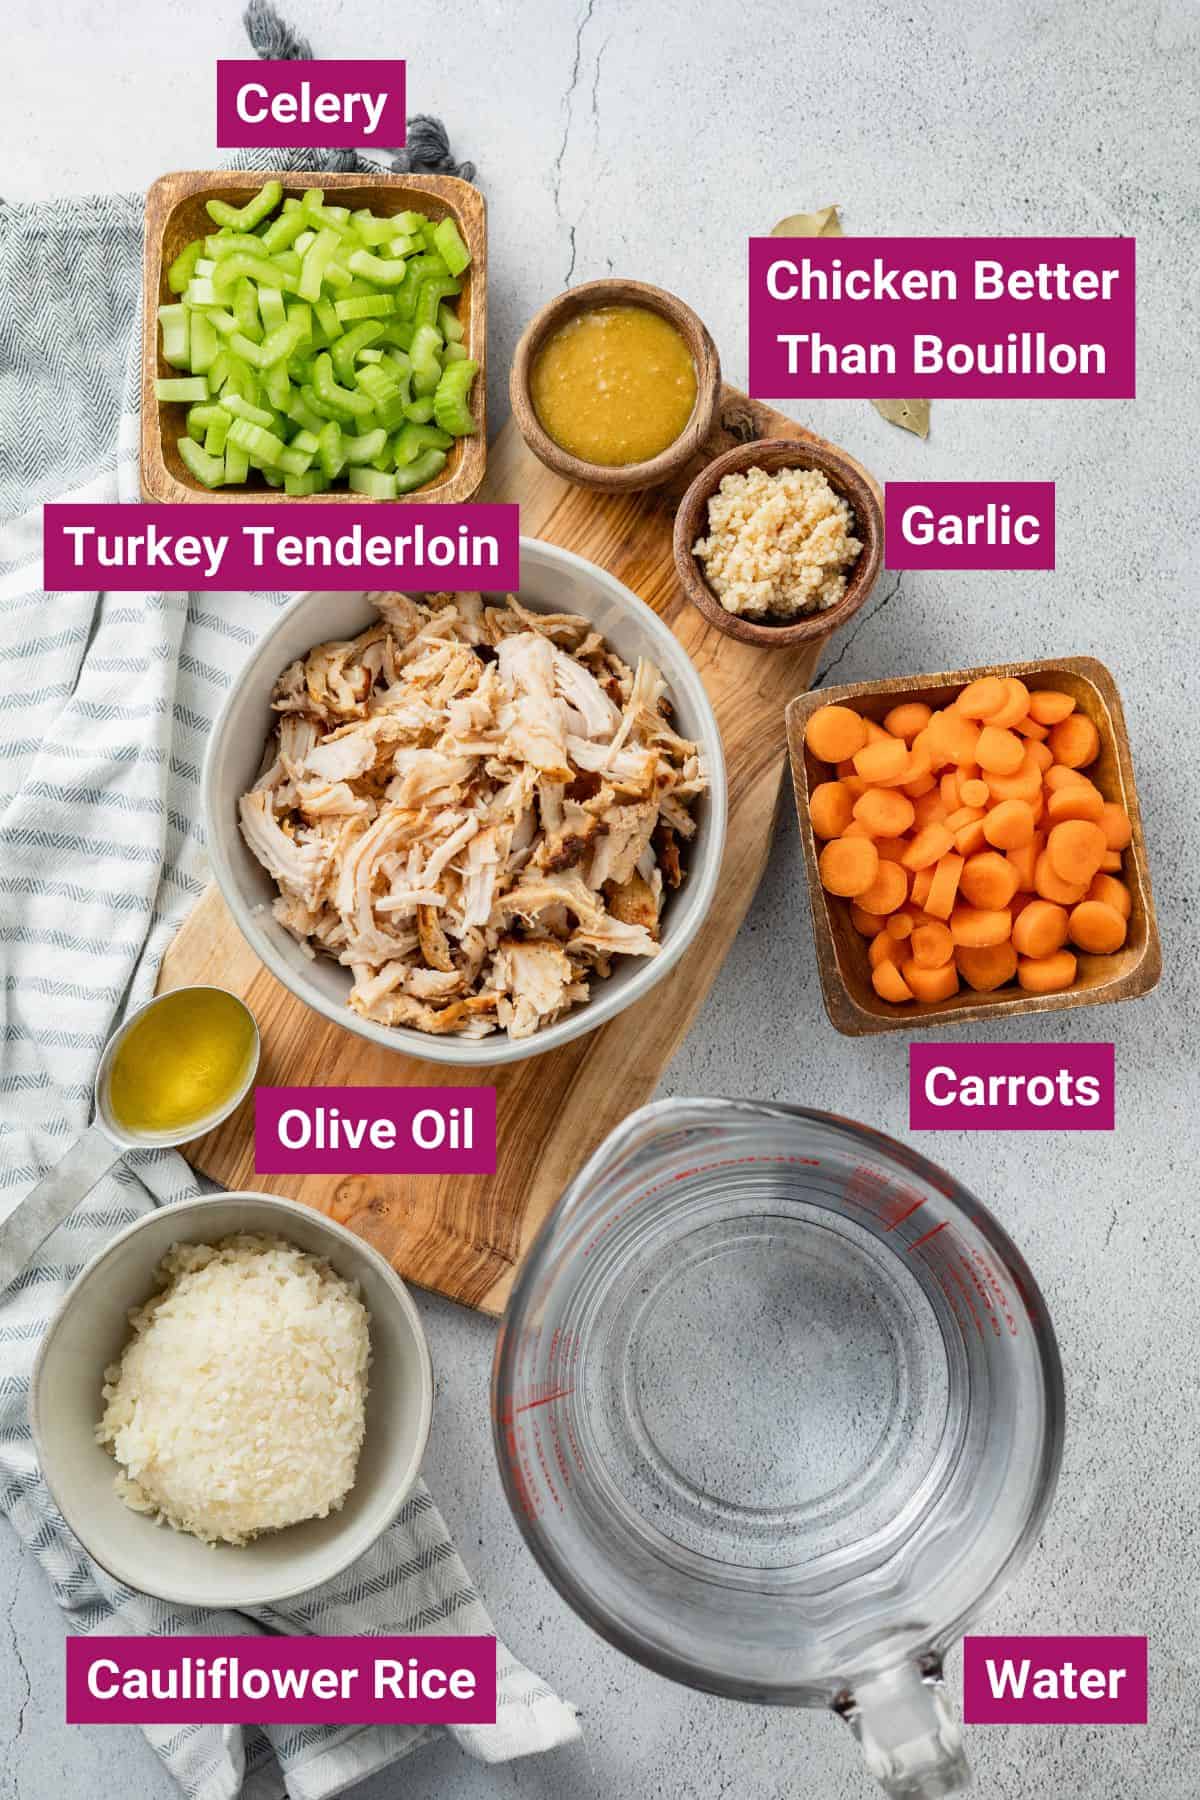 celery, turkey tenderloin, chicken better than bouillon, garlic, carrots, olive oil, cauliflower rice and water on separate bowls and containers